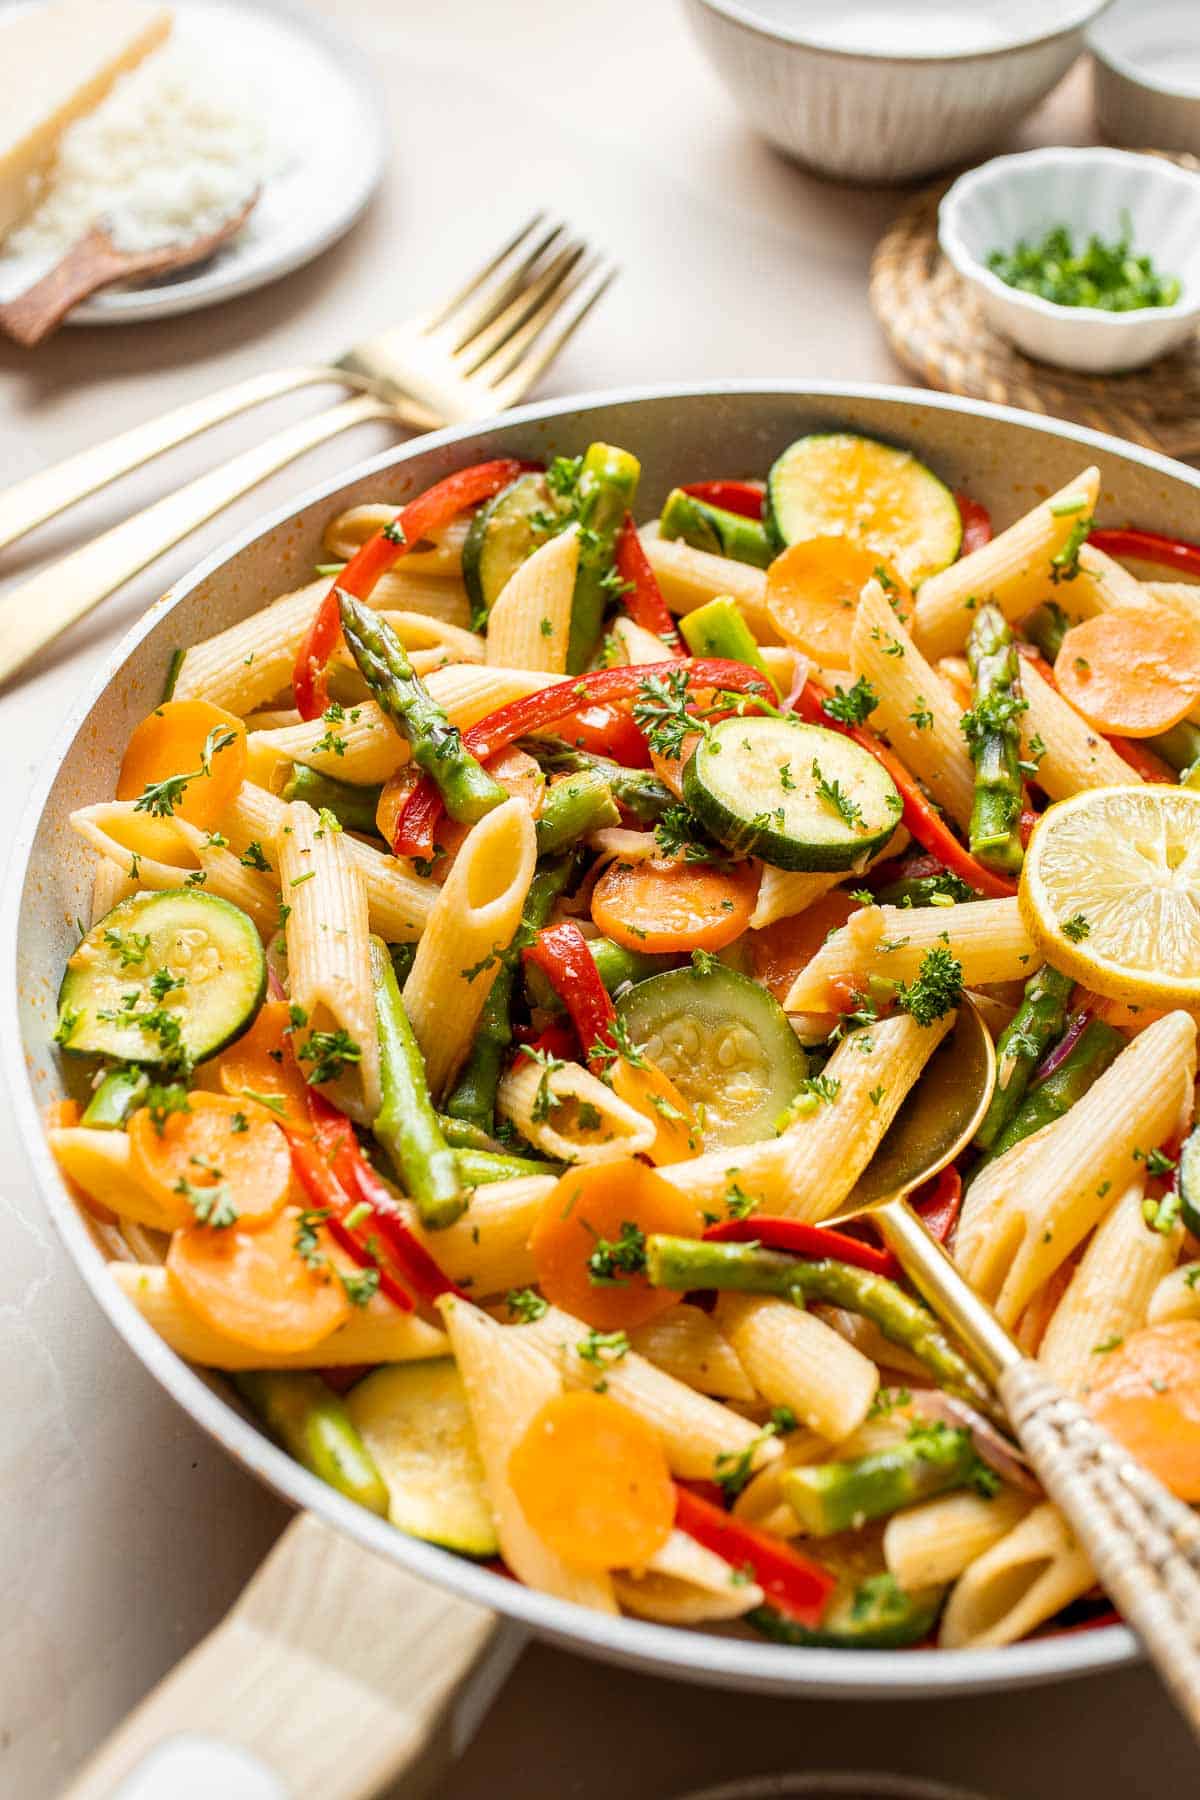 Pasta Primavera is a classic pasta dish that is overflowing with fresh colorful veggies. Make this vegetarian pasta this spring in less than 30 minutes! | aheadofthyme.com